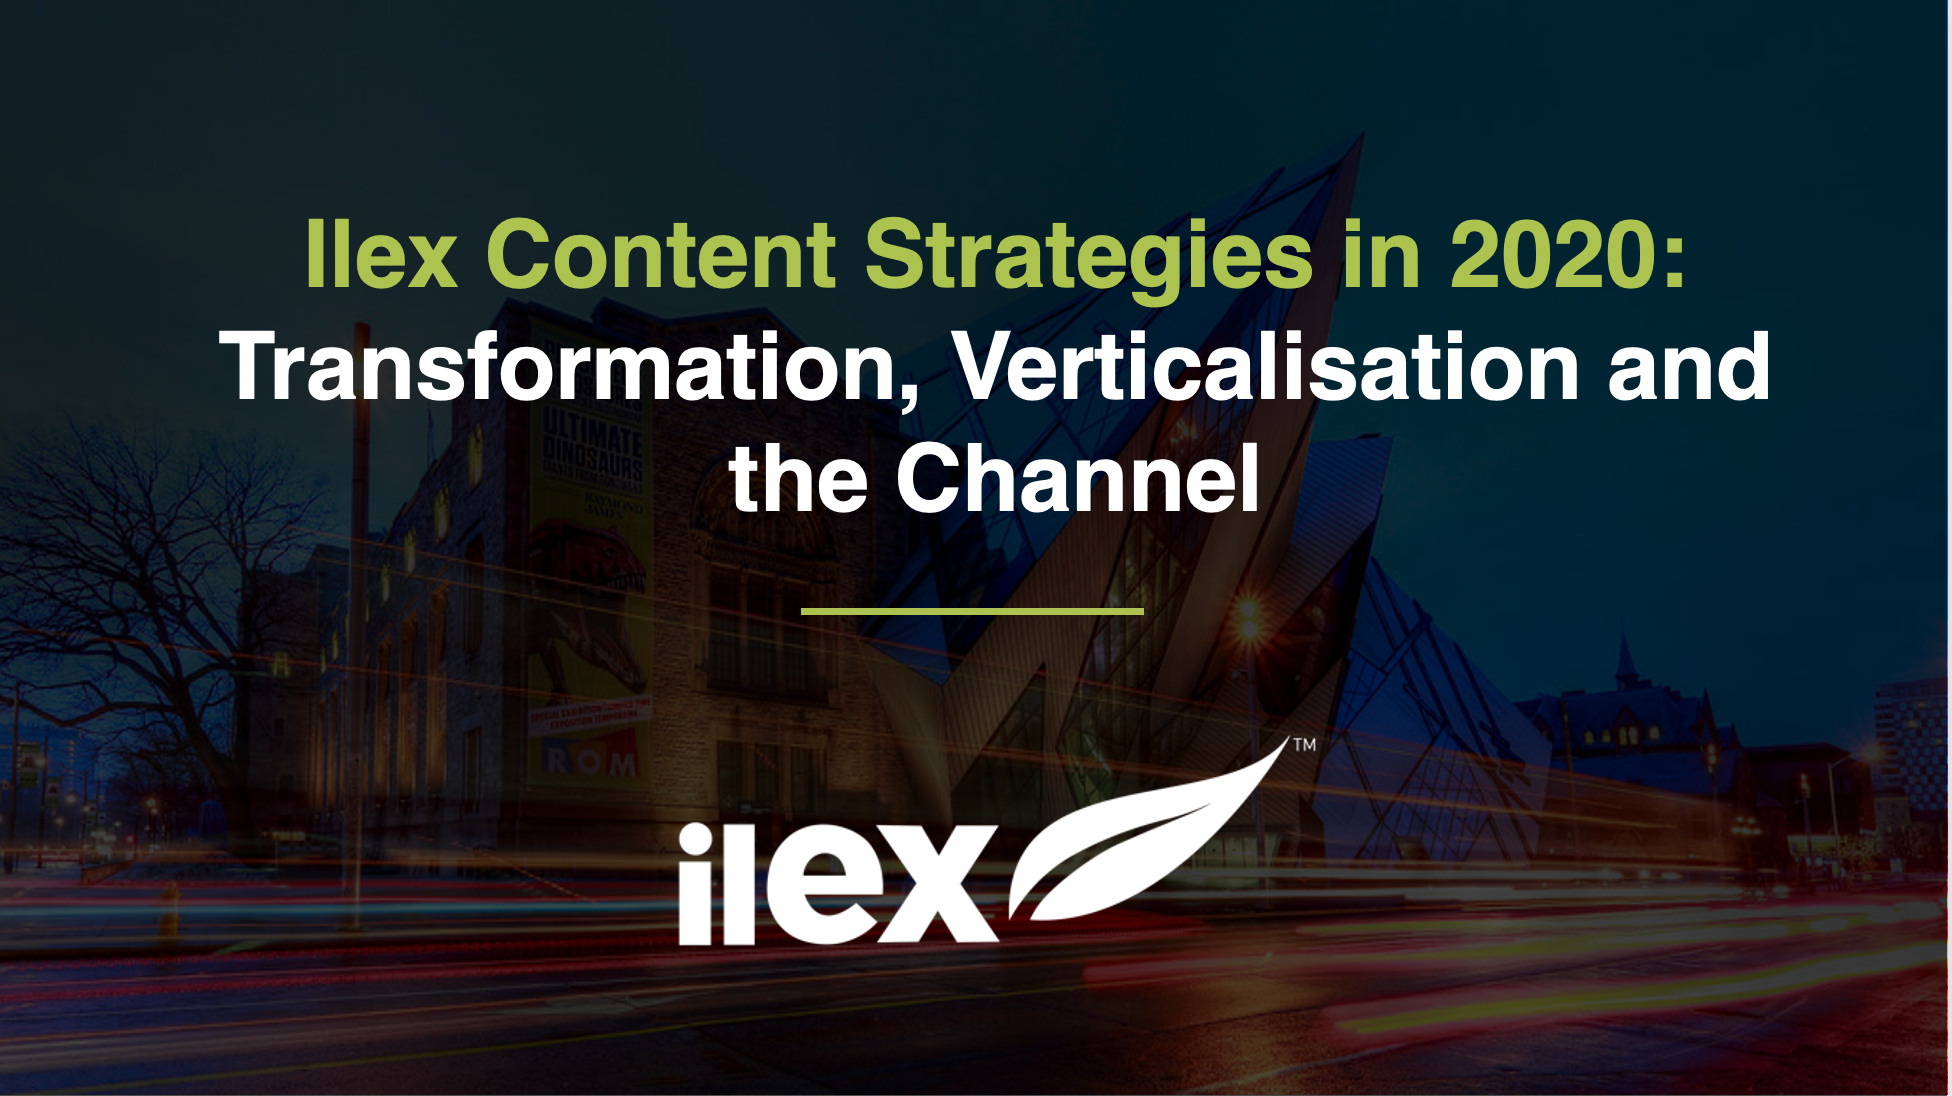 Ilex Content Strategies in 2020: Transformation, Verticalisation and the Channel